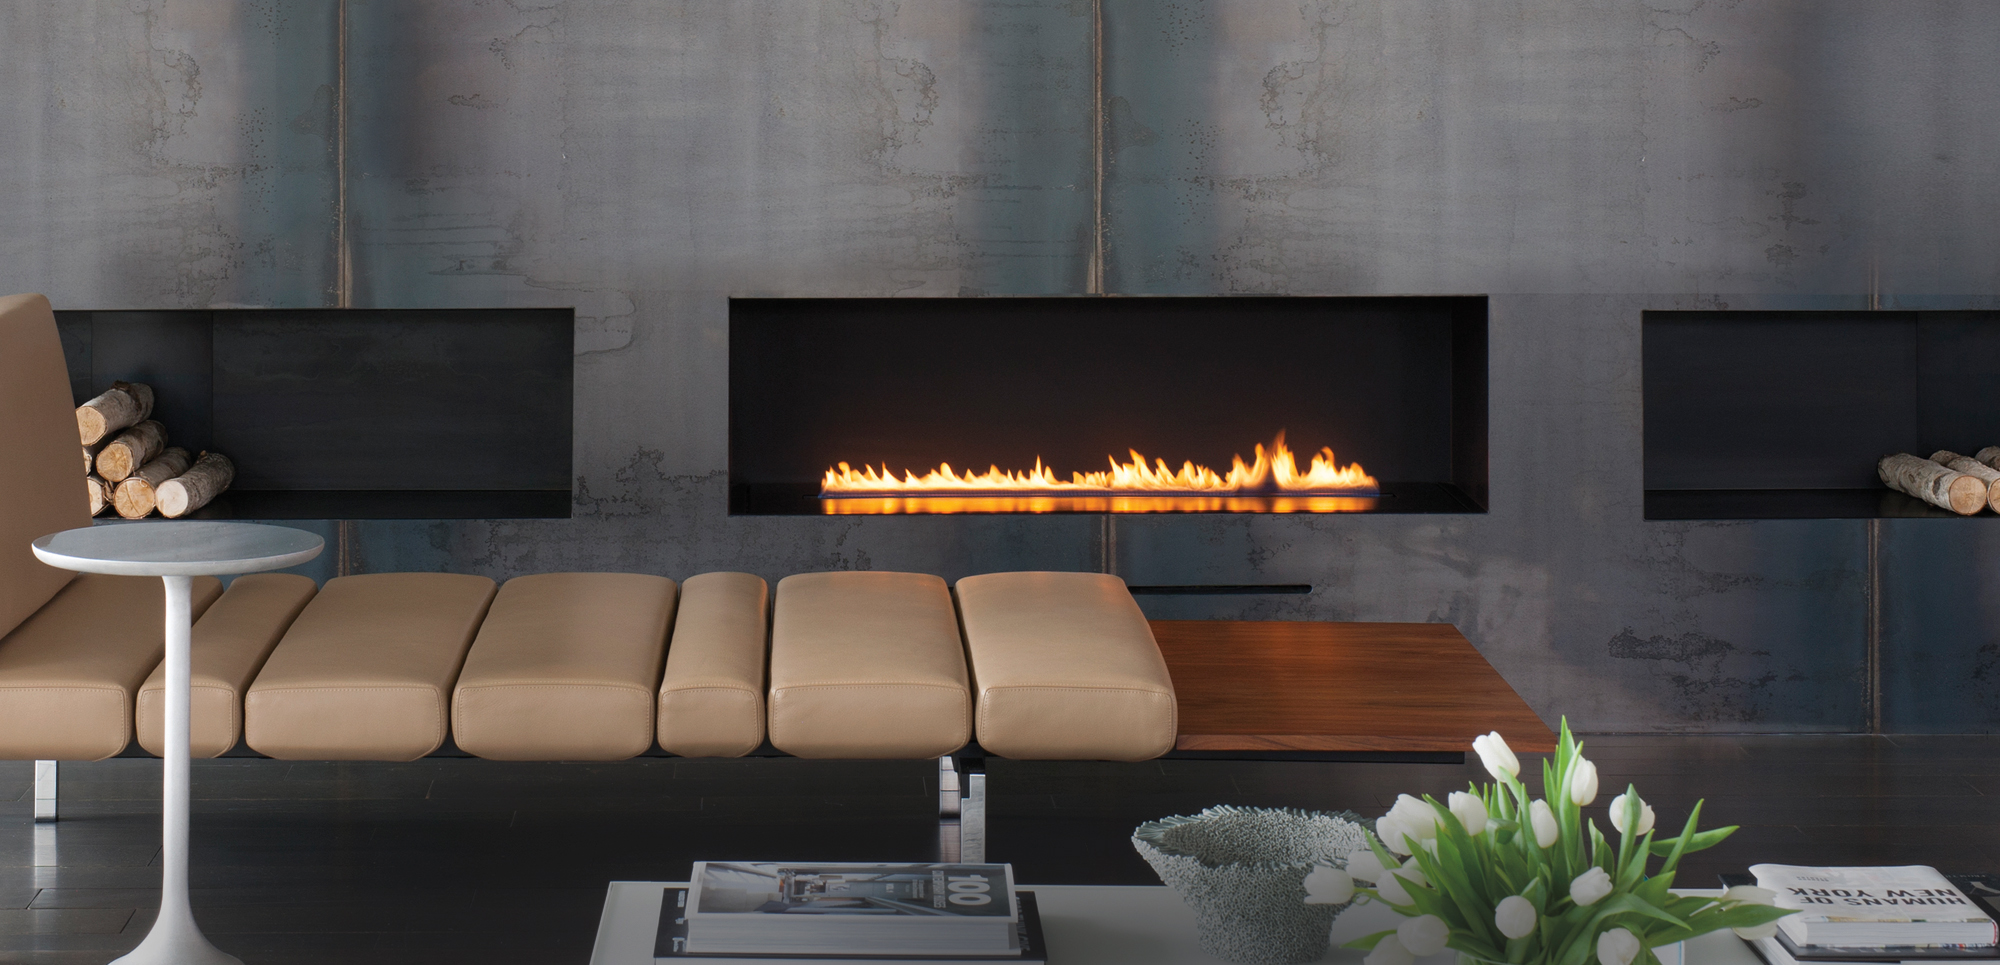 36 Inch Fireplace Insert Awesome Spark Modern Fires